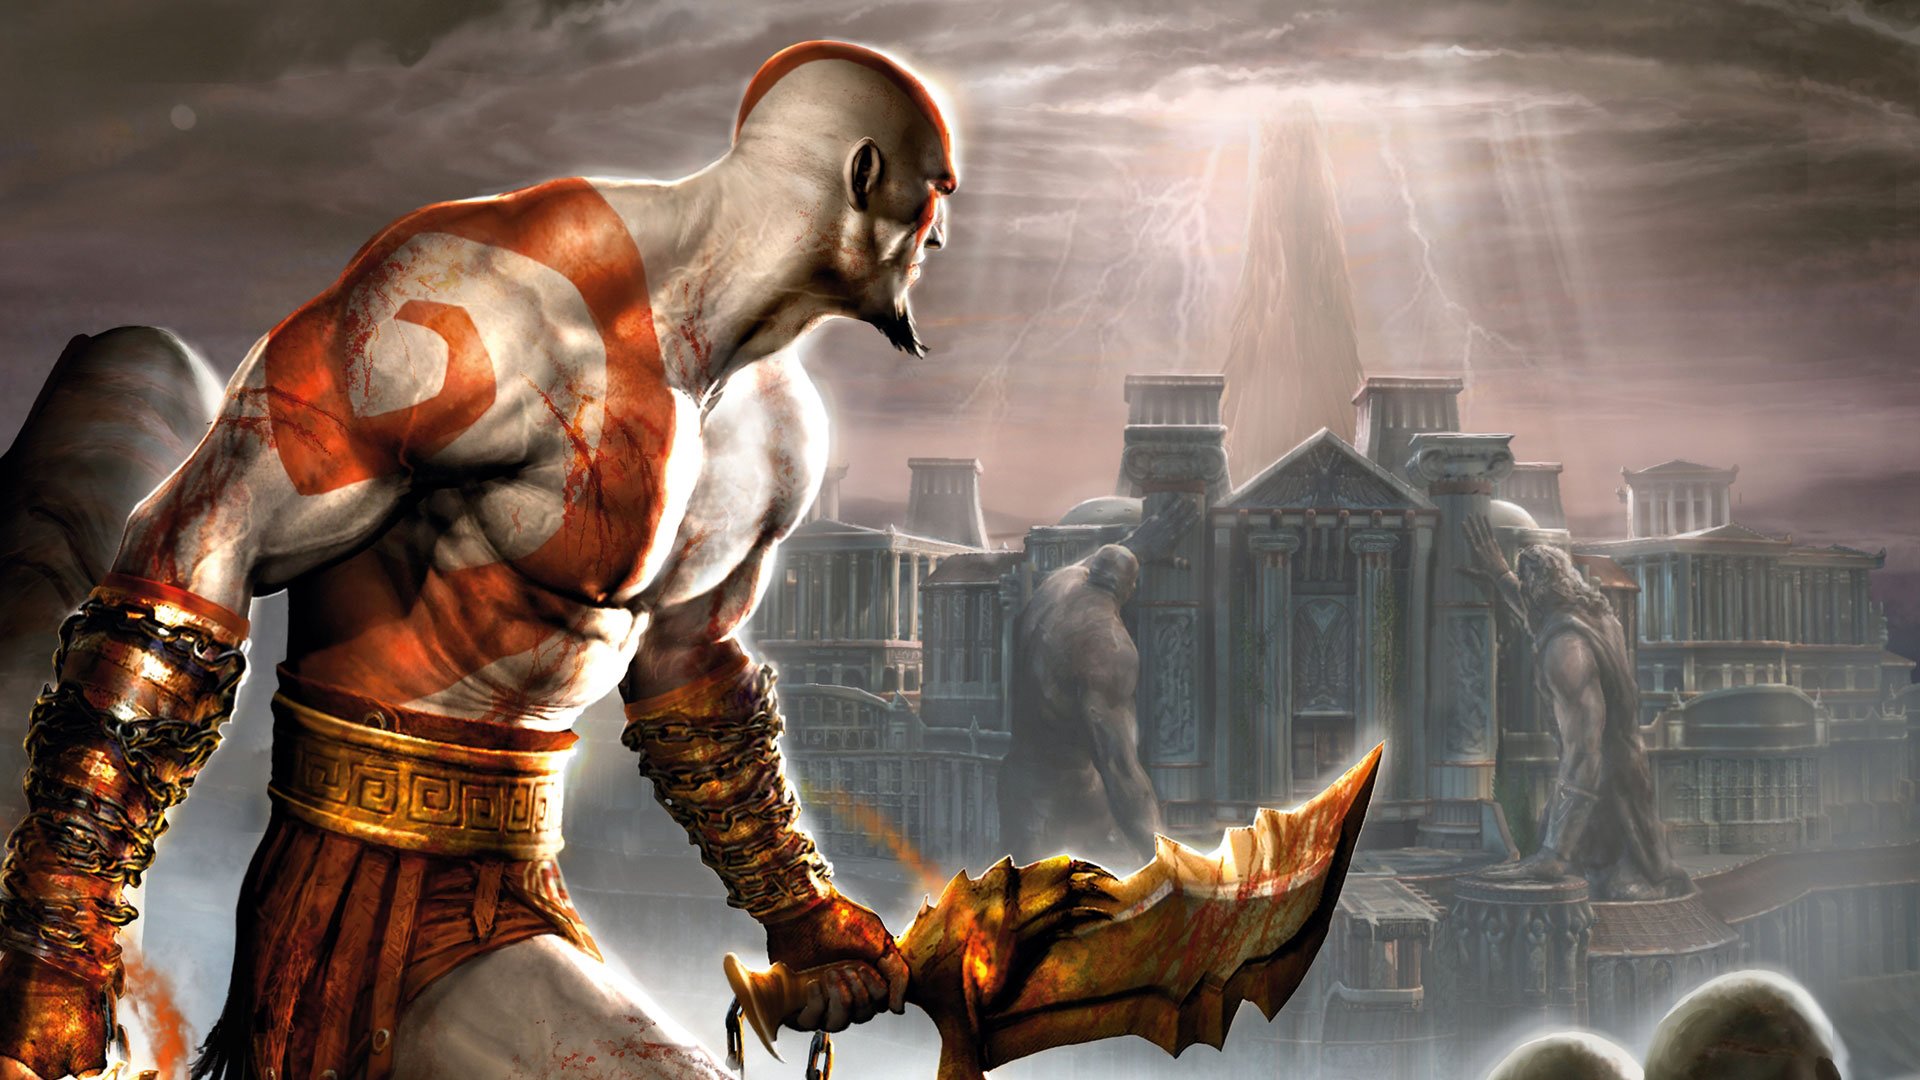 Kratos is the kind of guy who doesn’t take “No! Please! I don’t want to die!” for an answer. That’s what we like about him.